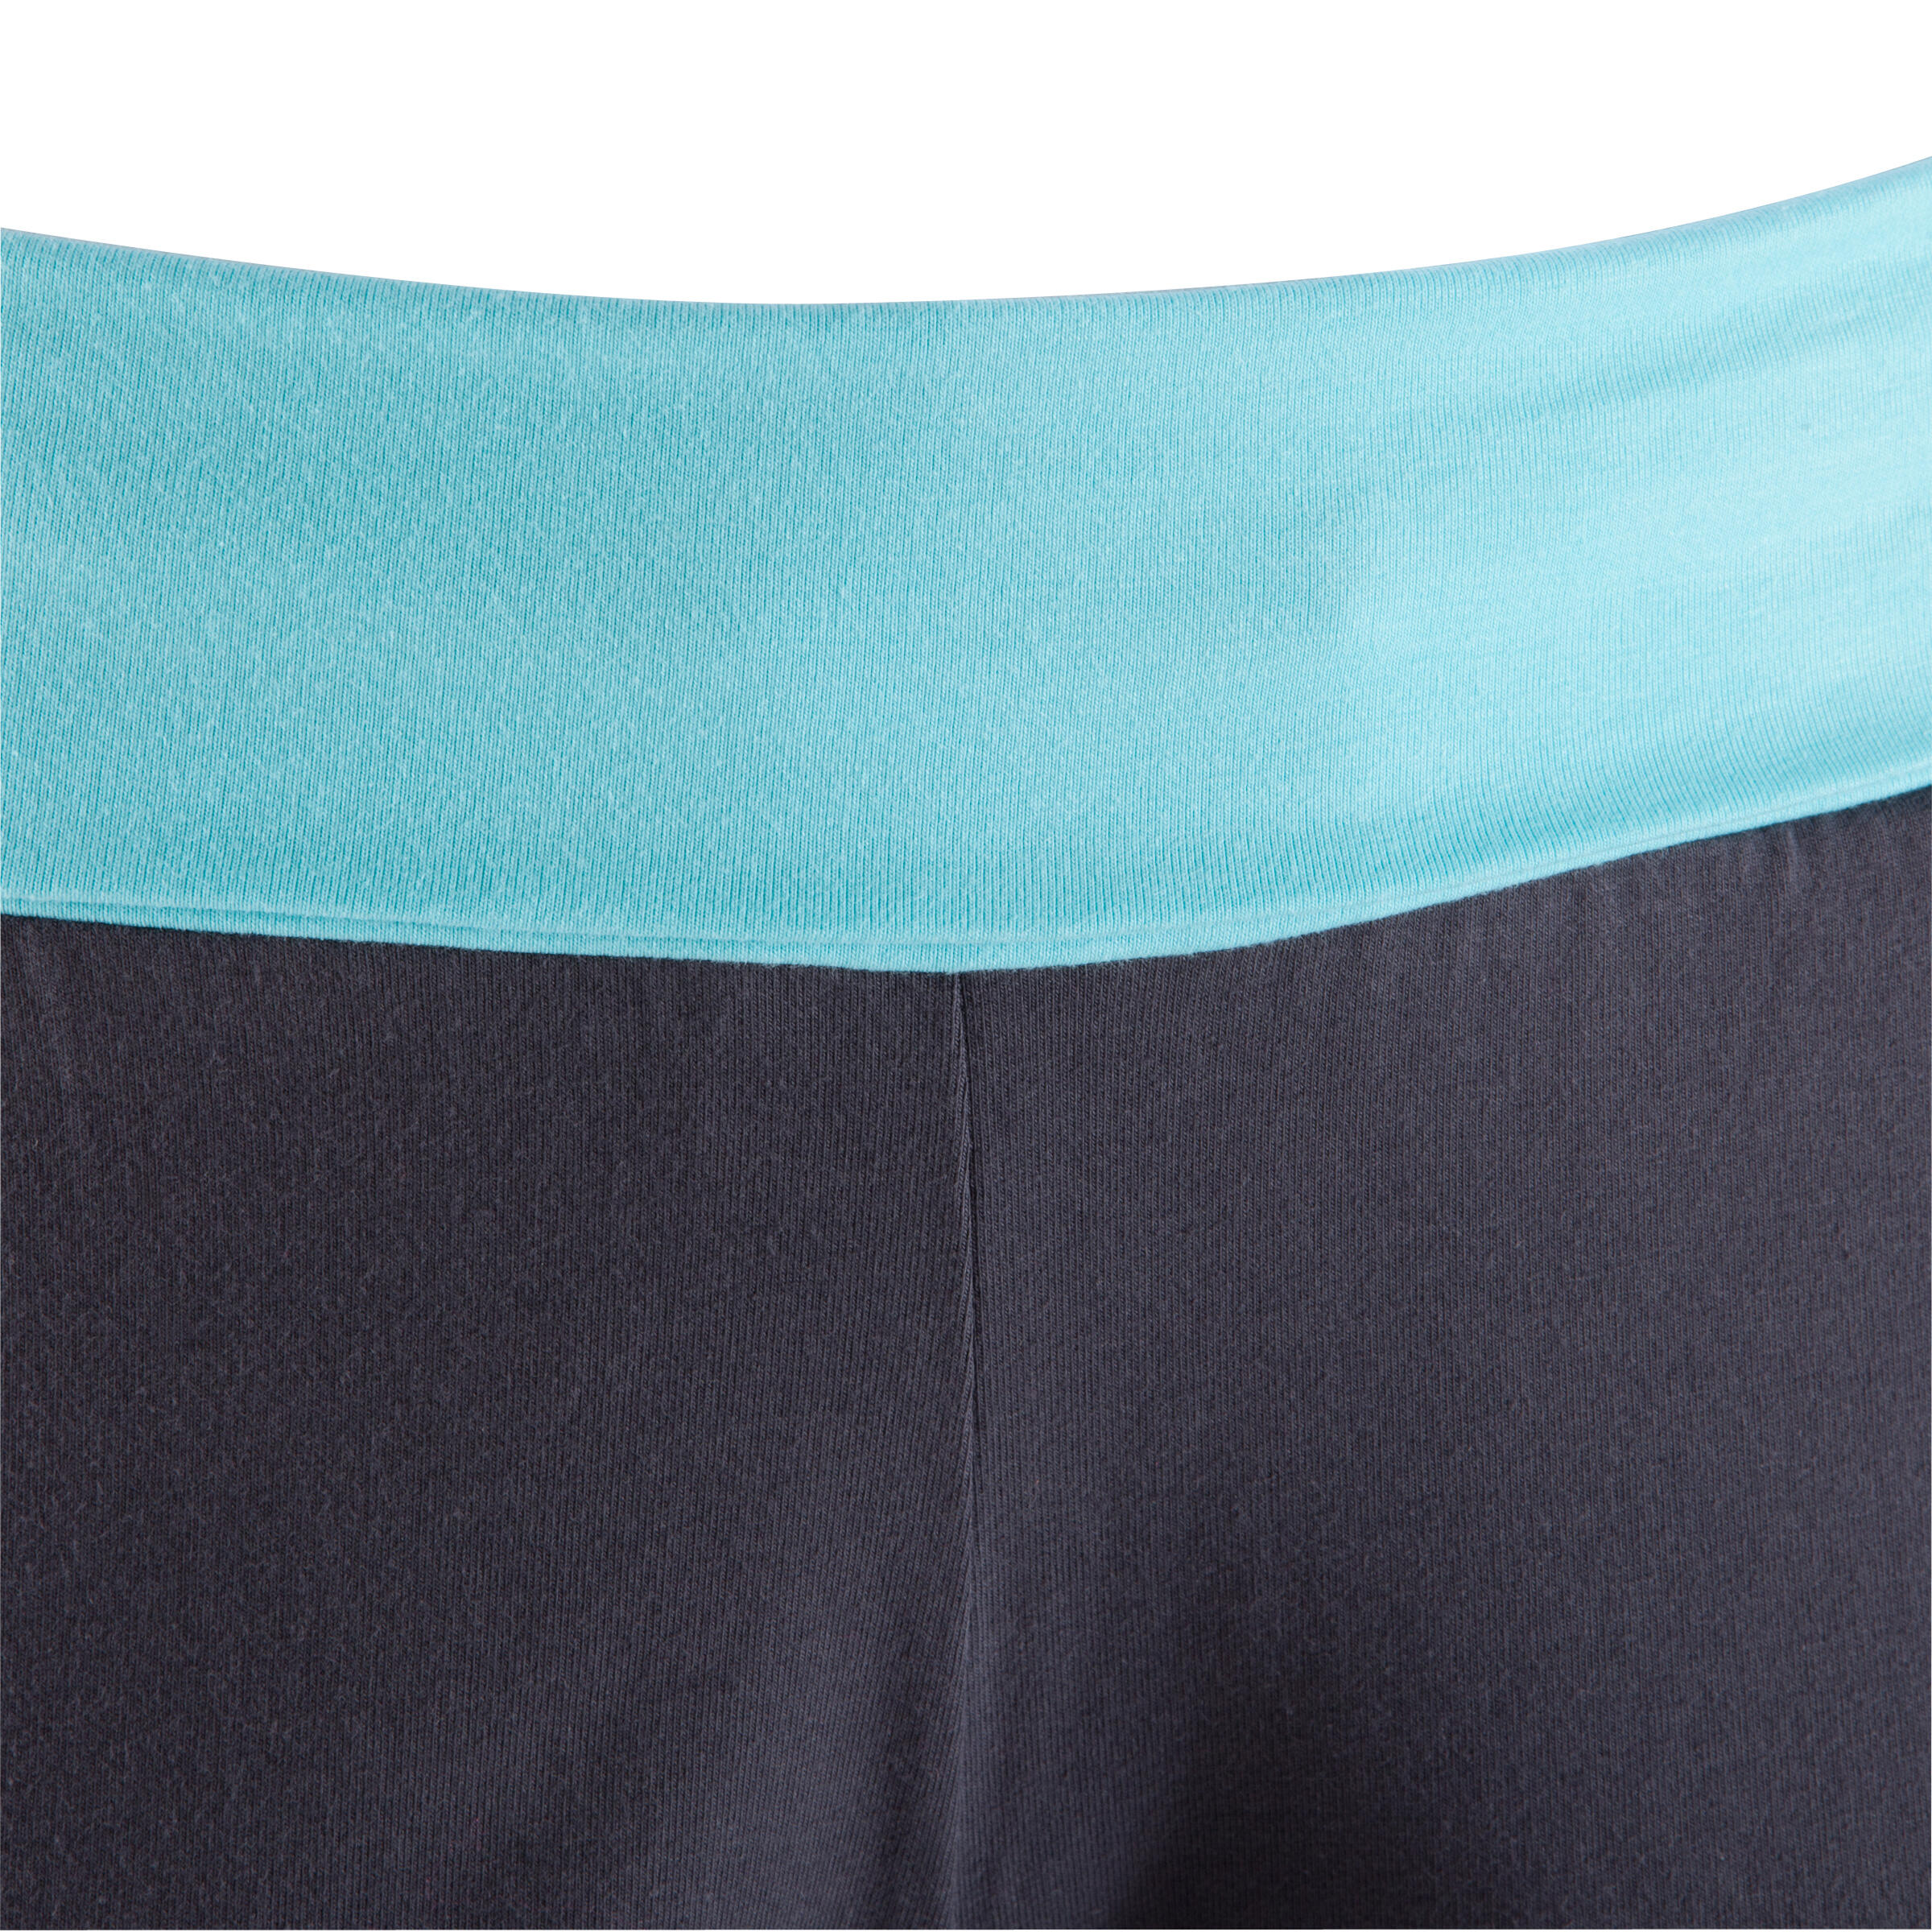 Women's Gentle Gym Yoga and Pilates Organic-Cotton Cropped Bottoms - Grey/Blue 6/10